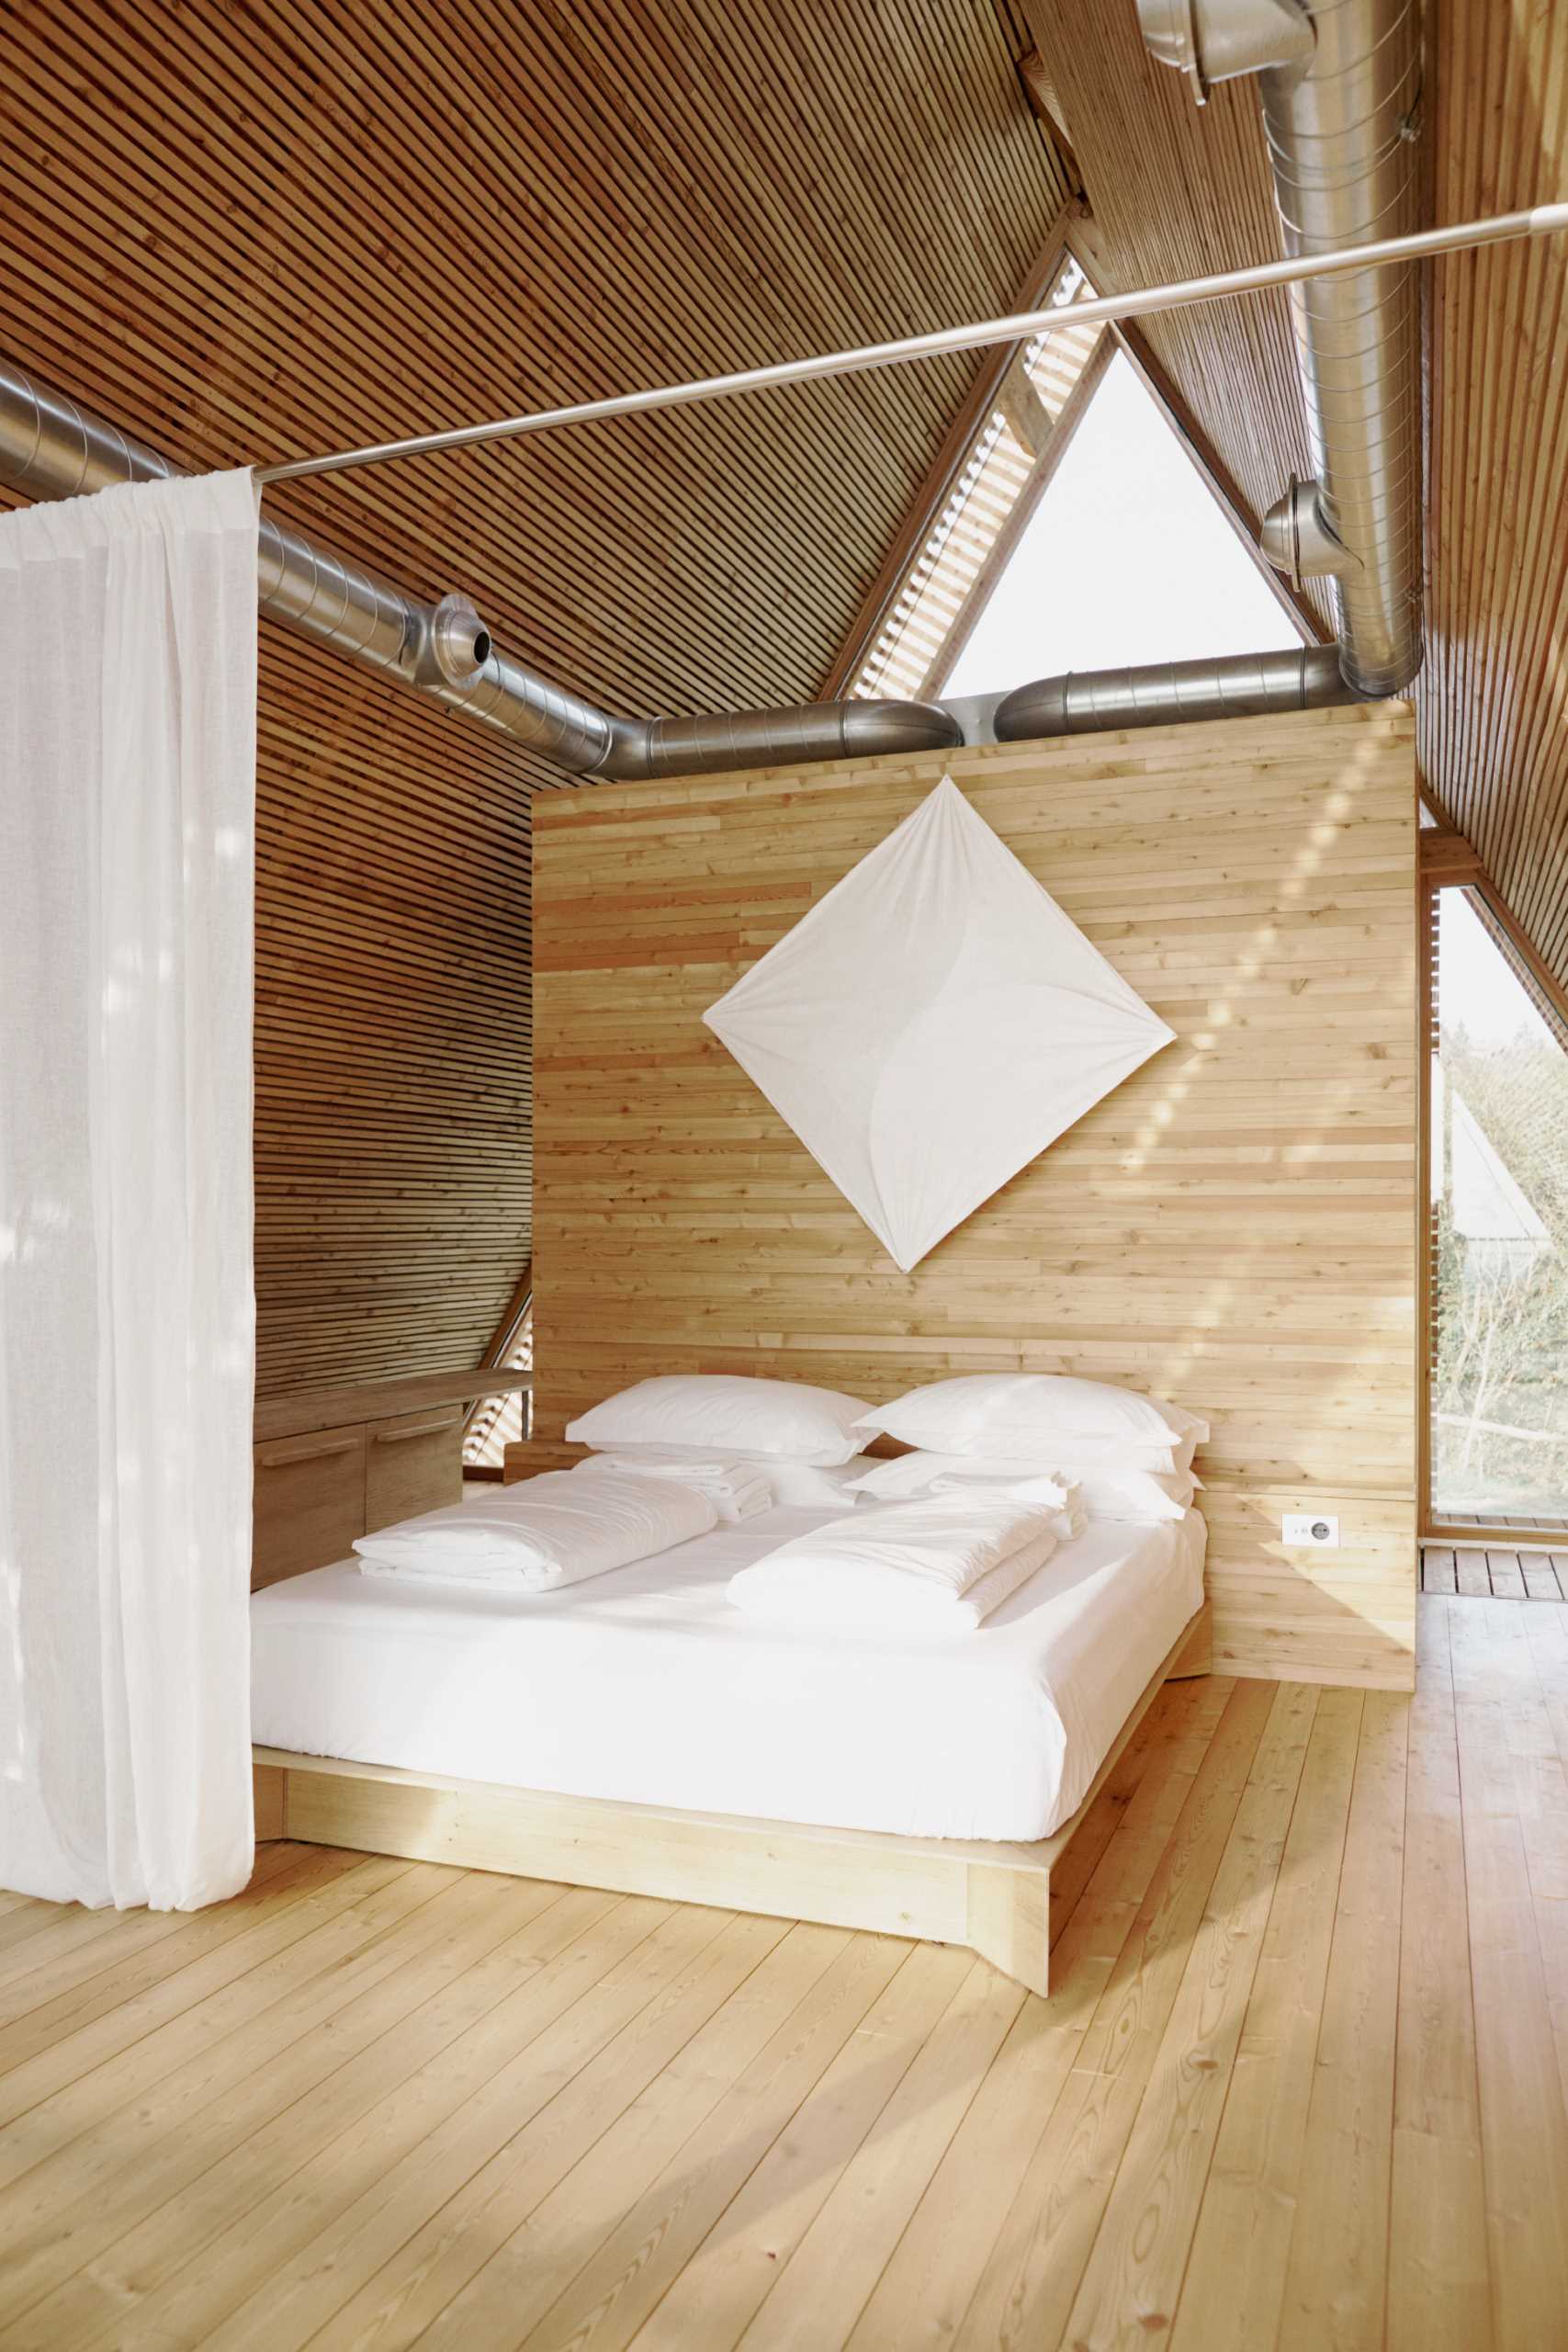 Long curtains hang from the ceiling and provide privacy for the sleeping area when closed.